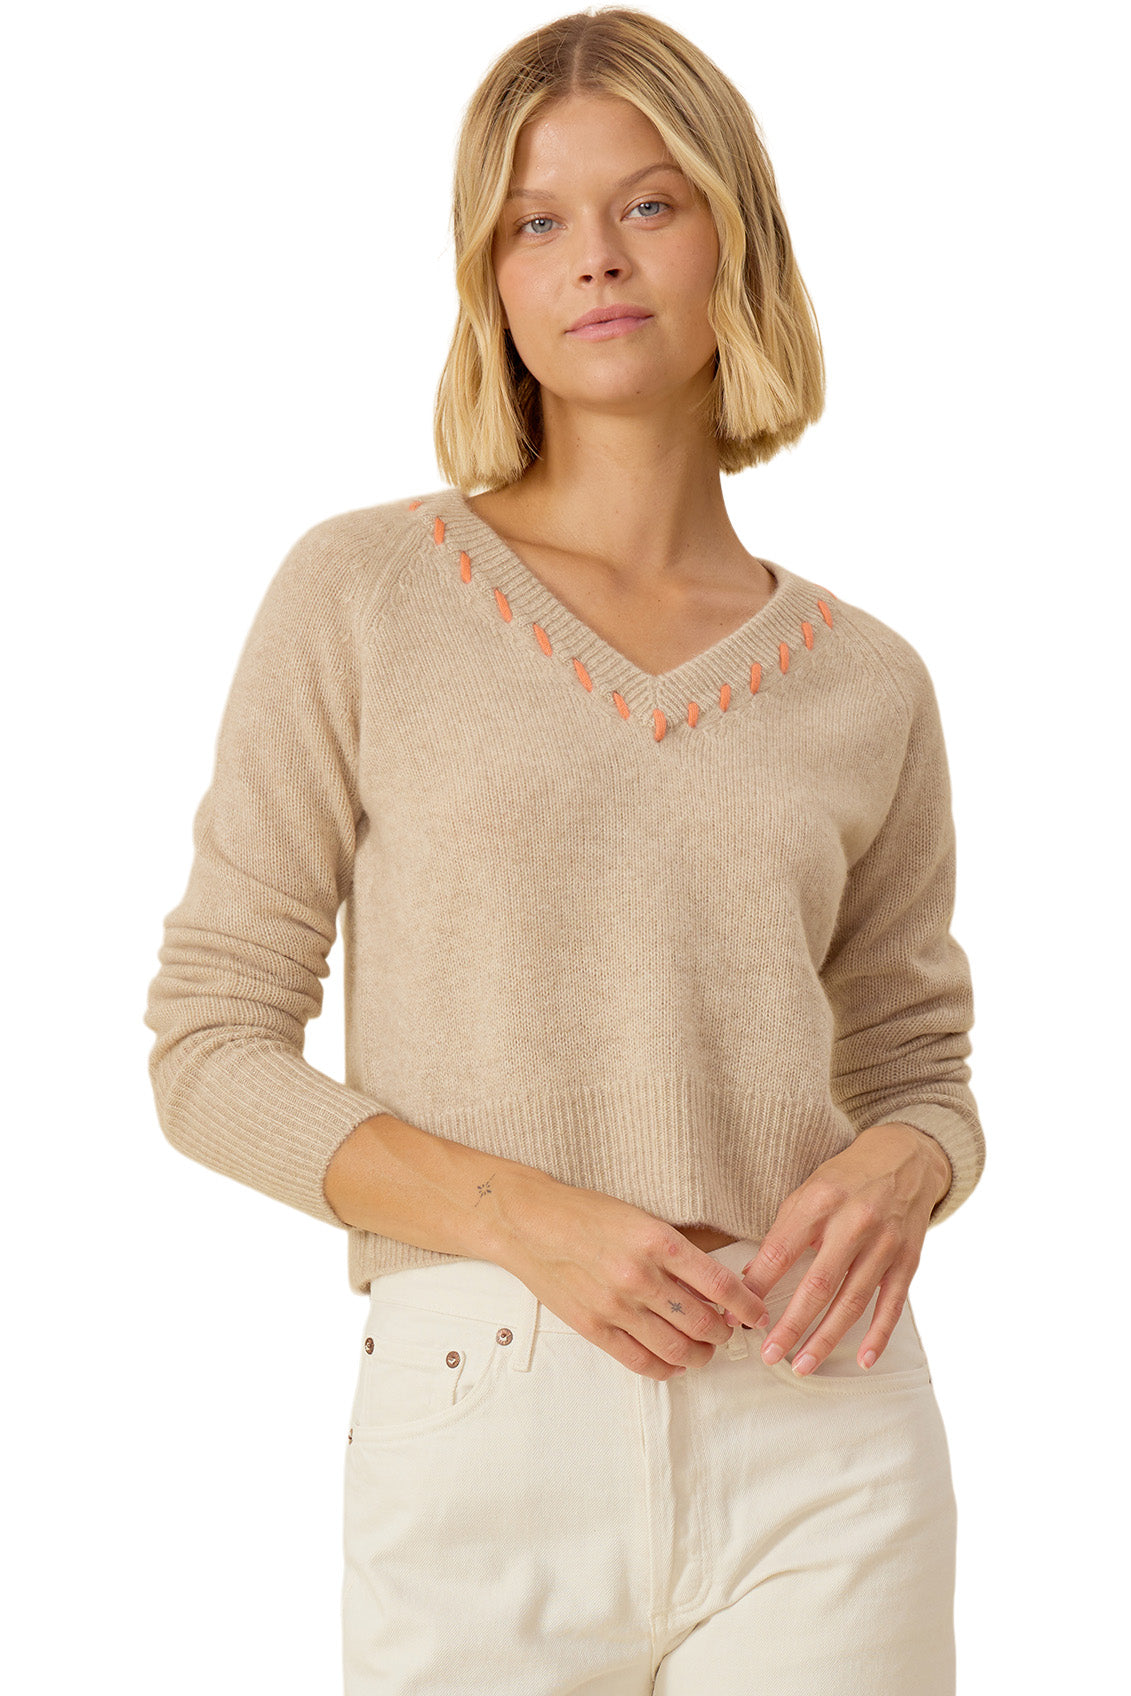 One Grey Day Blakely V-neck in Oatmeal Combo